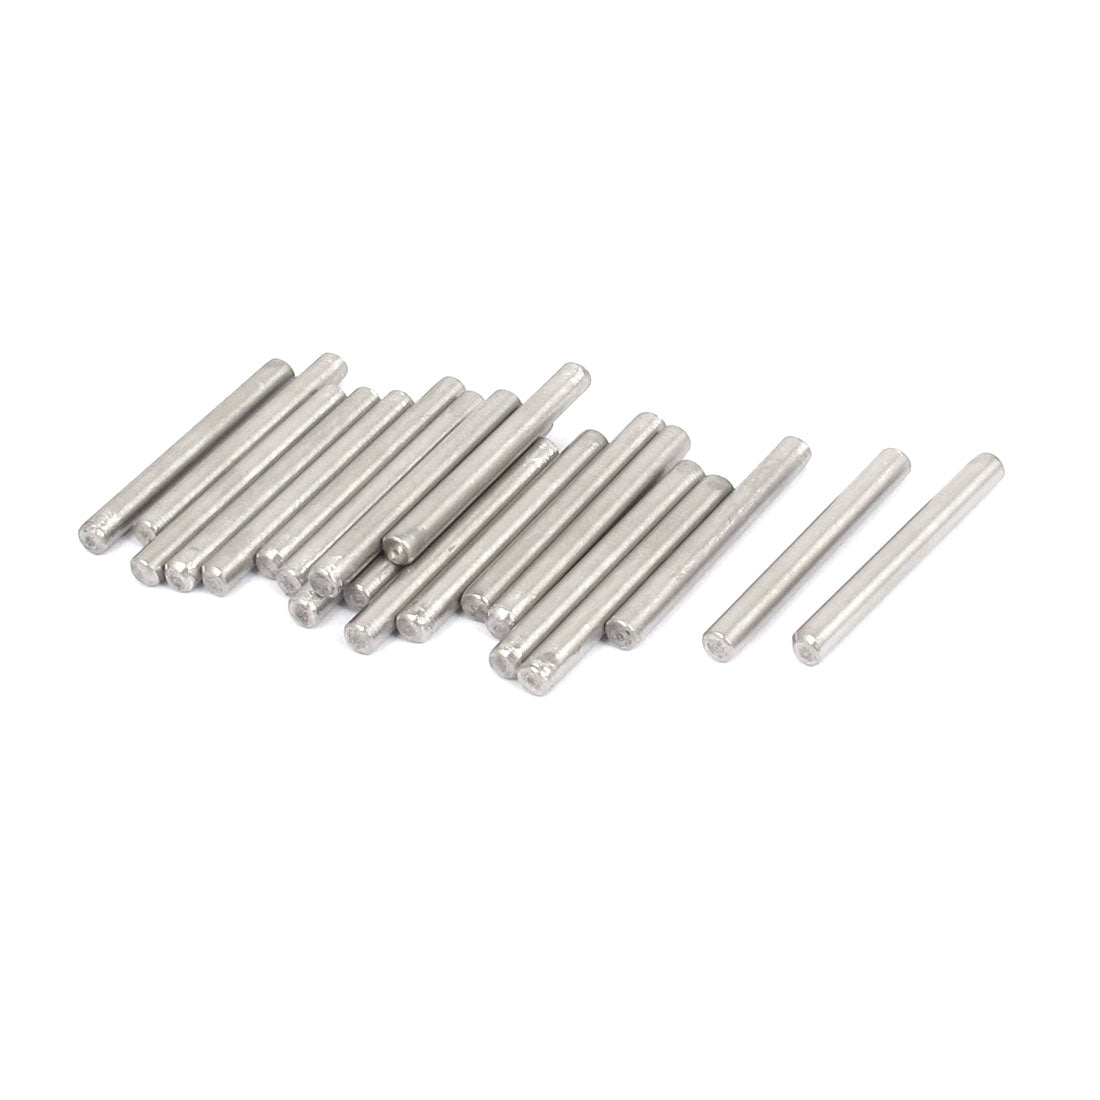 uxcell Uxcell 3mmx28mm 304 Stainless Steel Parallel Dowel Pins Fastener Elements 20pcs